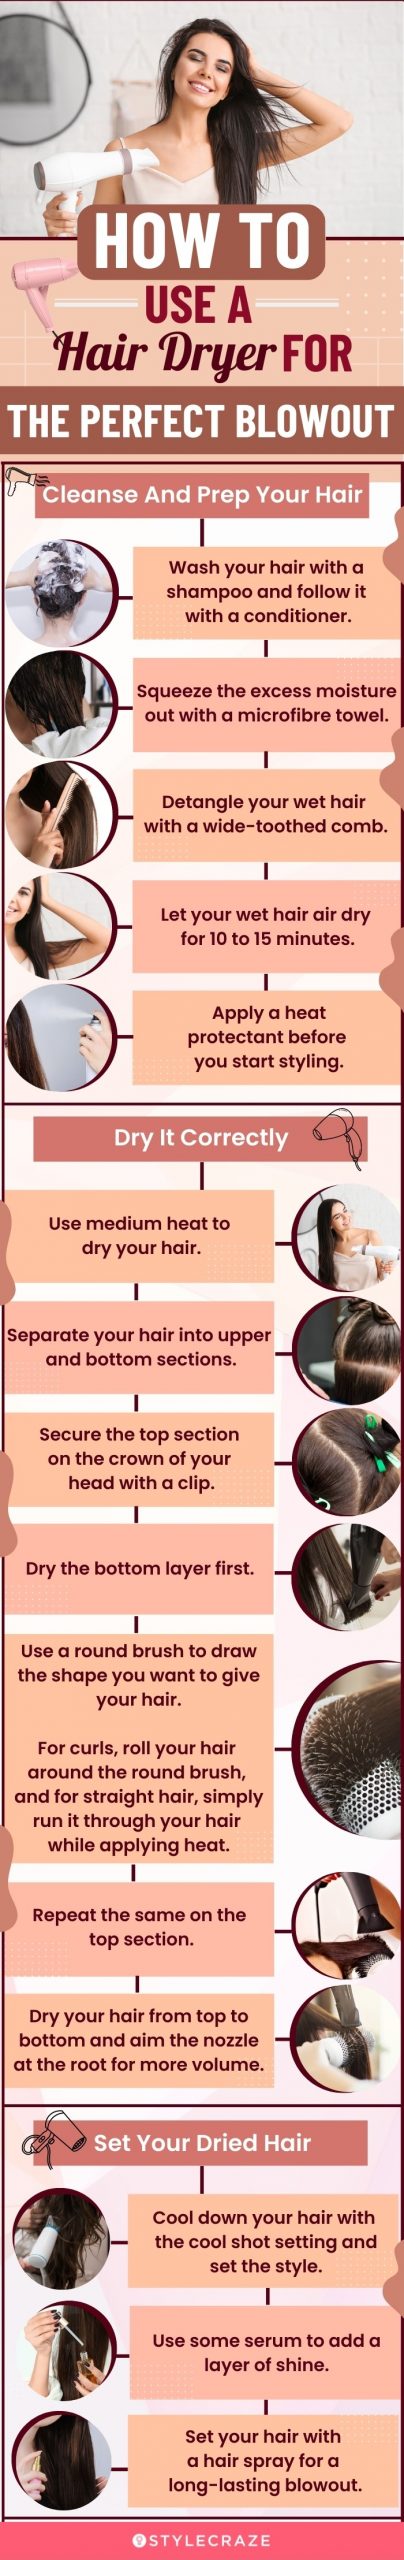 How To Use A Hair Dryer For The Perfect Blowout (infographic)